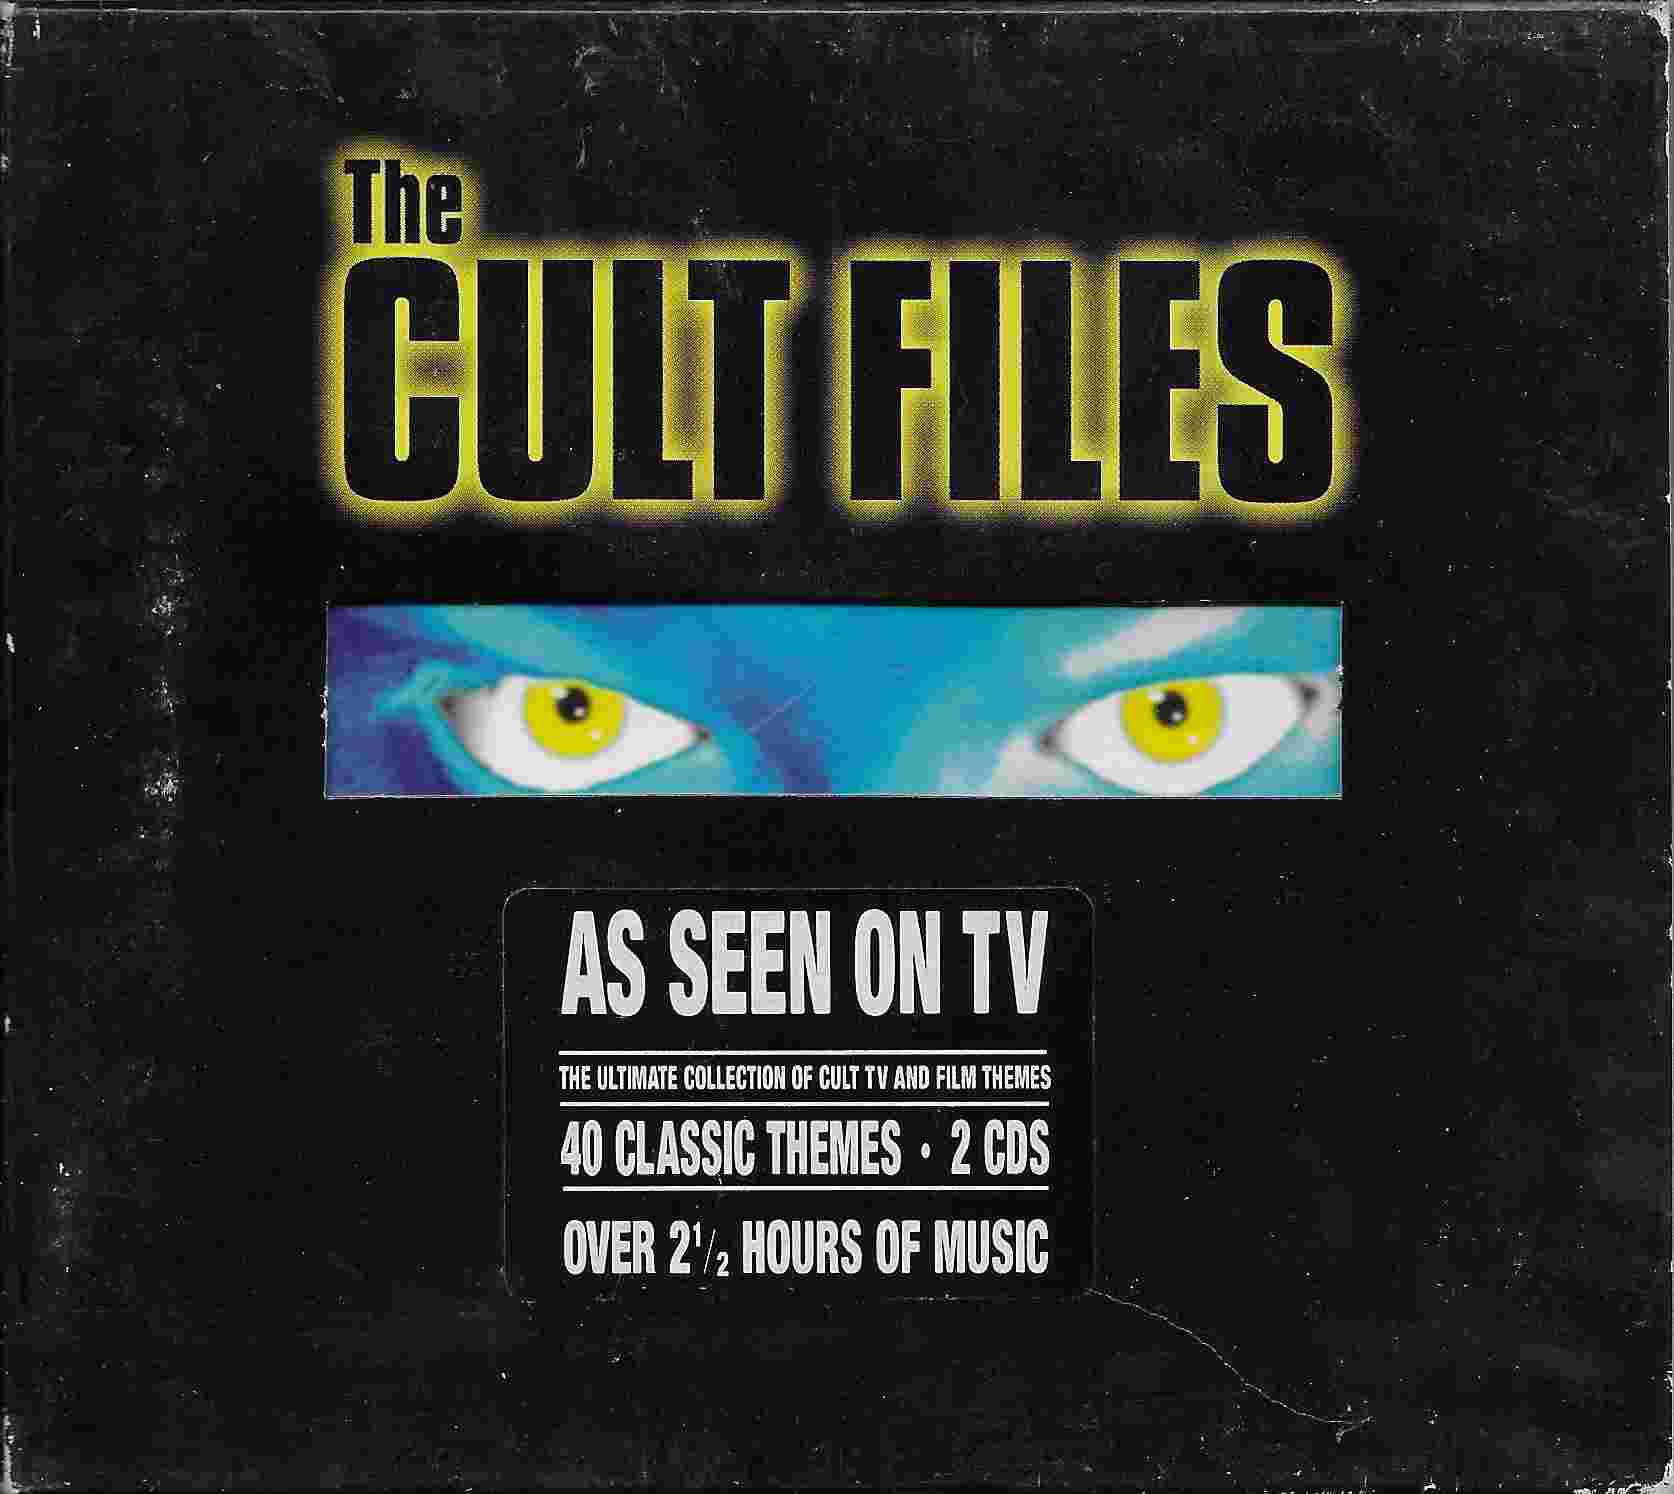 Picture of FILMXCD 184 The cult files by artist Various from ITV, Channel 4 and Channel 5 library